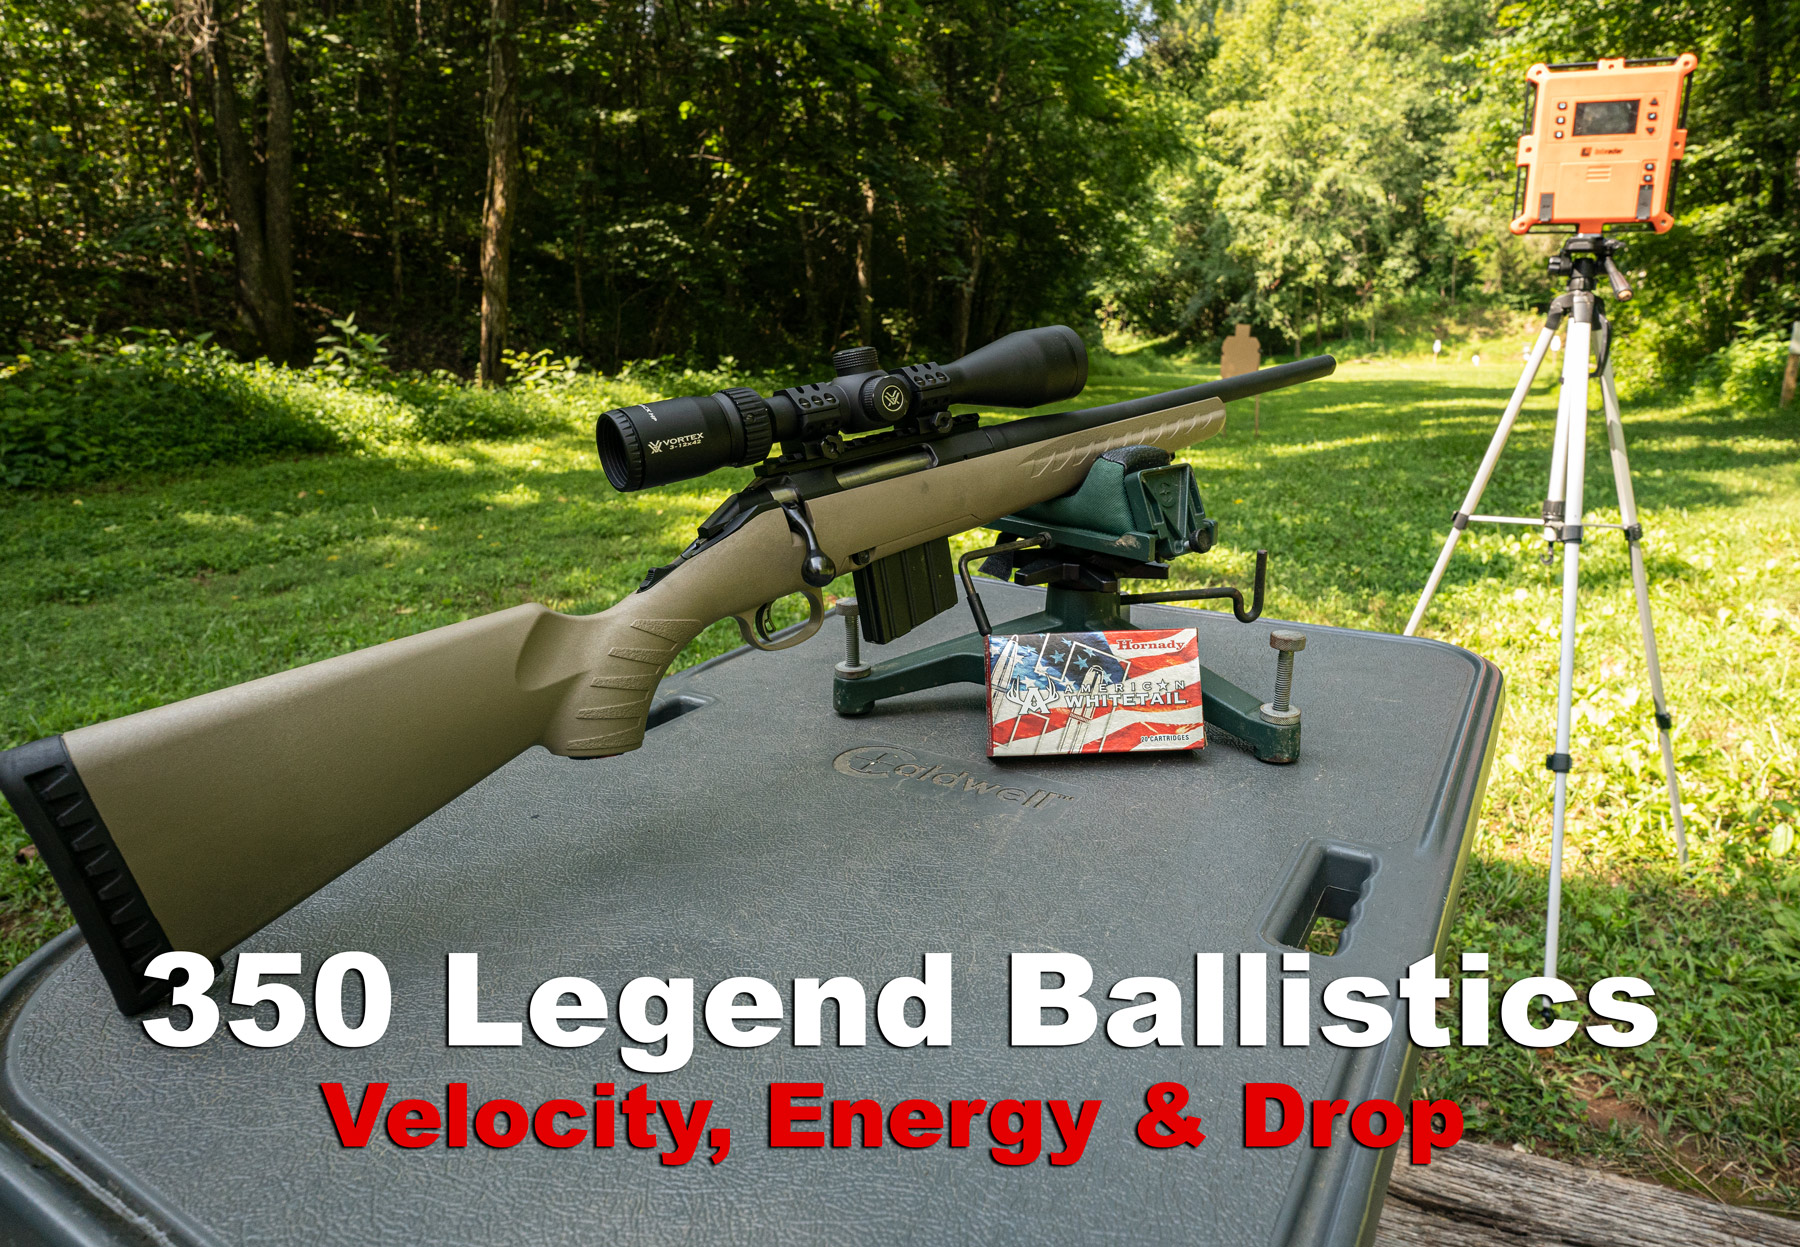 350 legend ballistic testing with a rifle at a shooting range